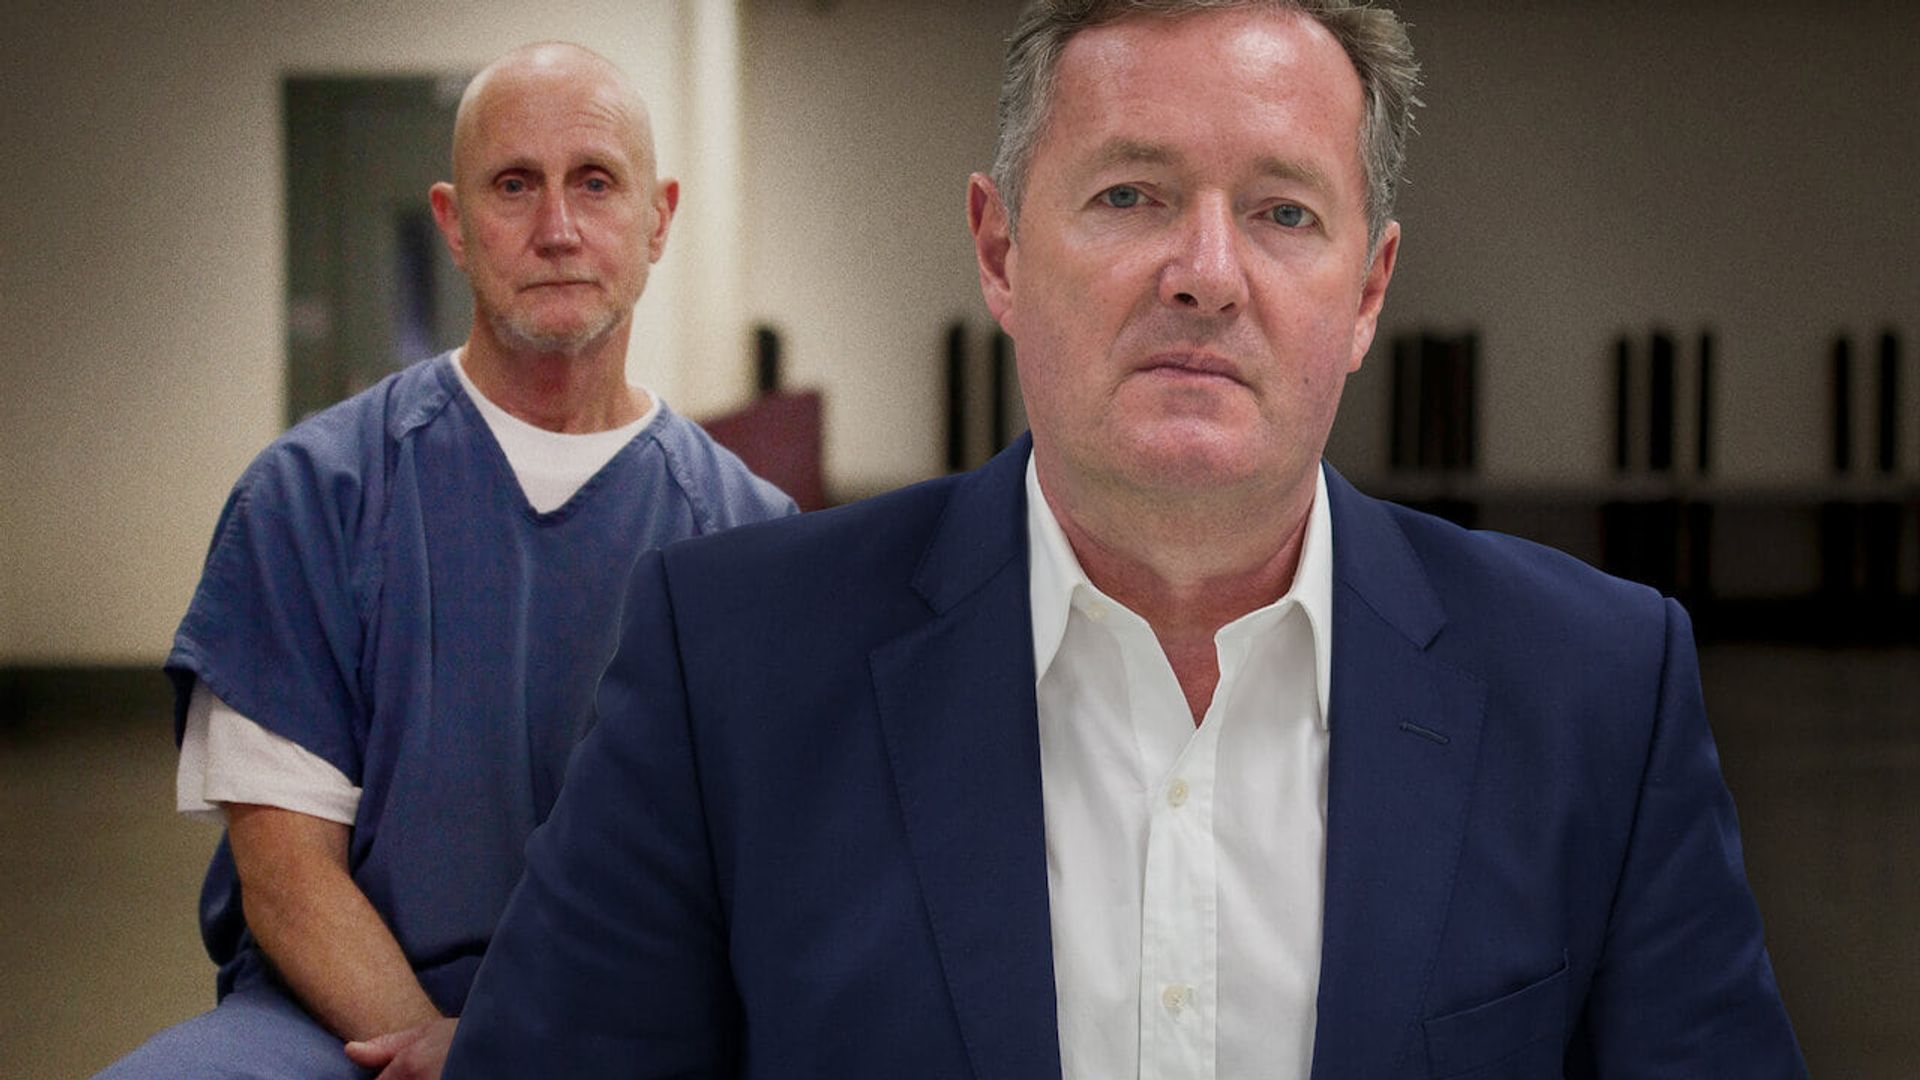 Confessions of a Serial Killer with Piers Morgan background